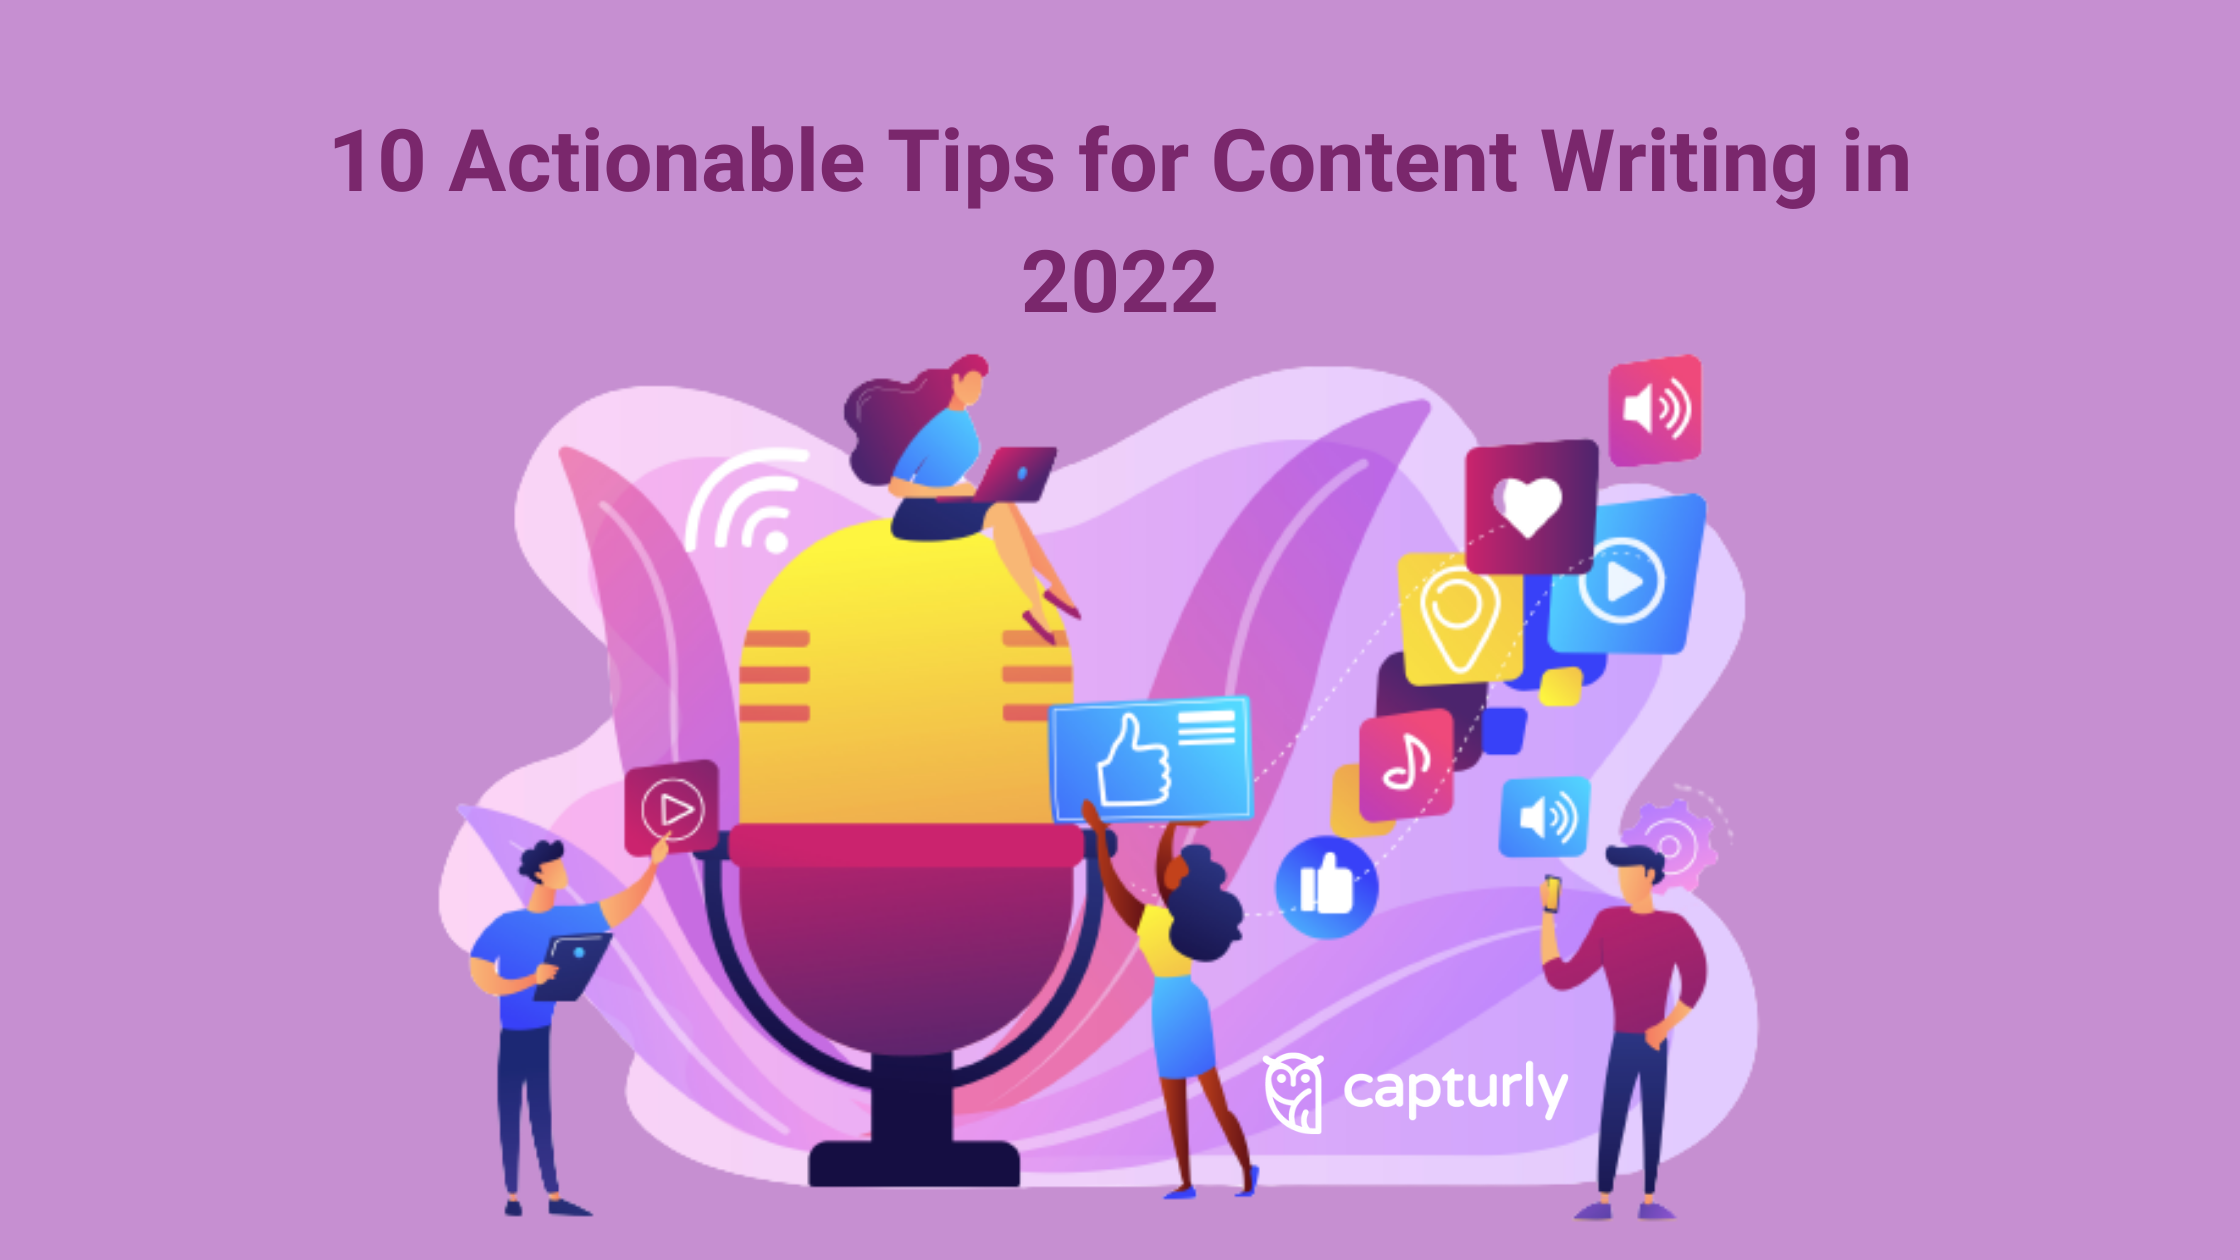 10 Actionable Tips for Content Writing in 2022